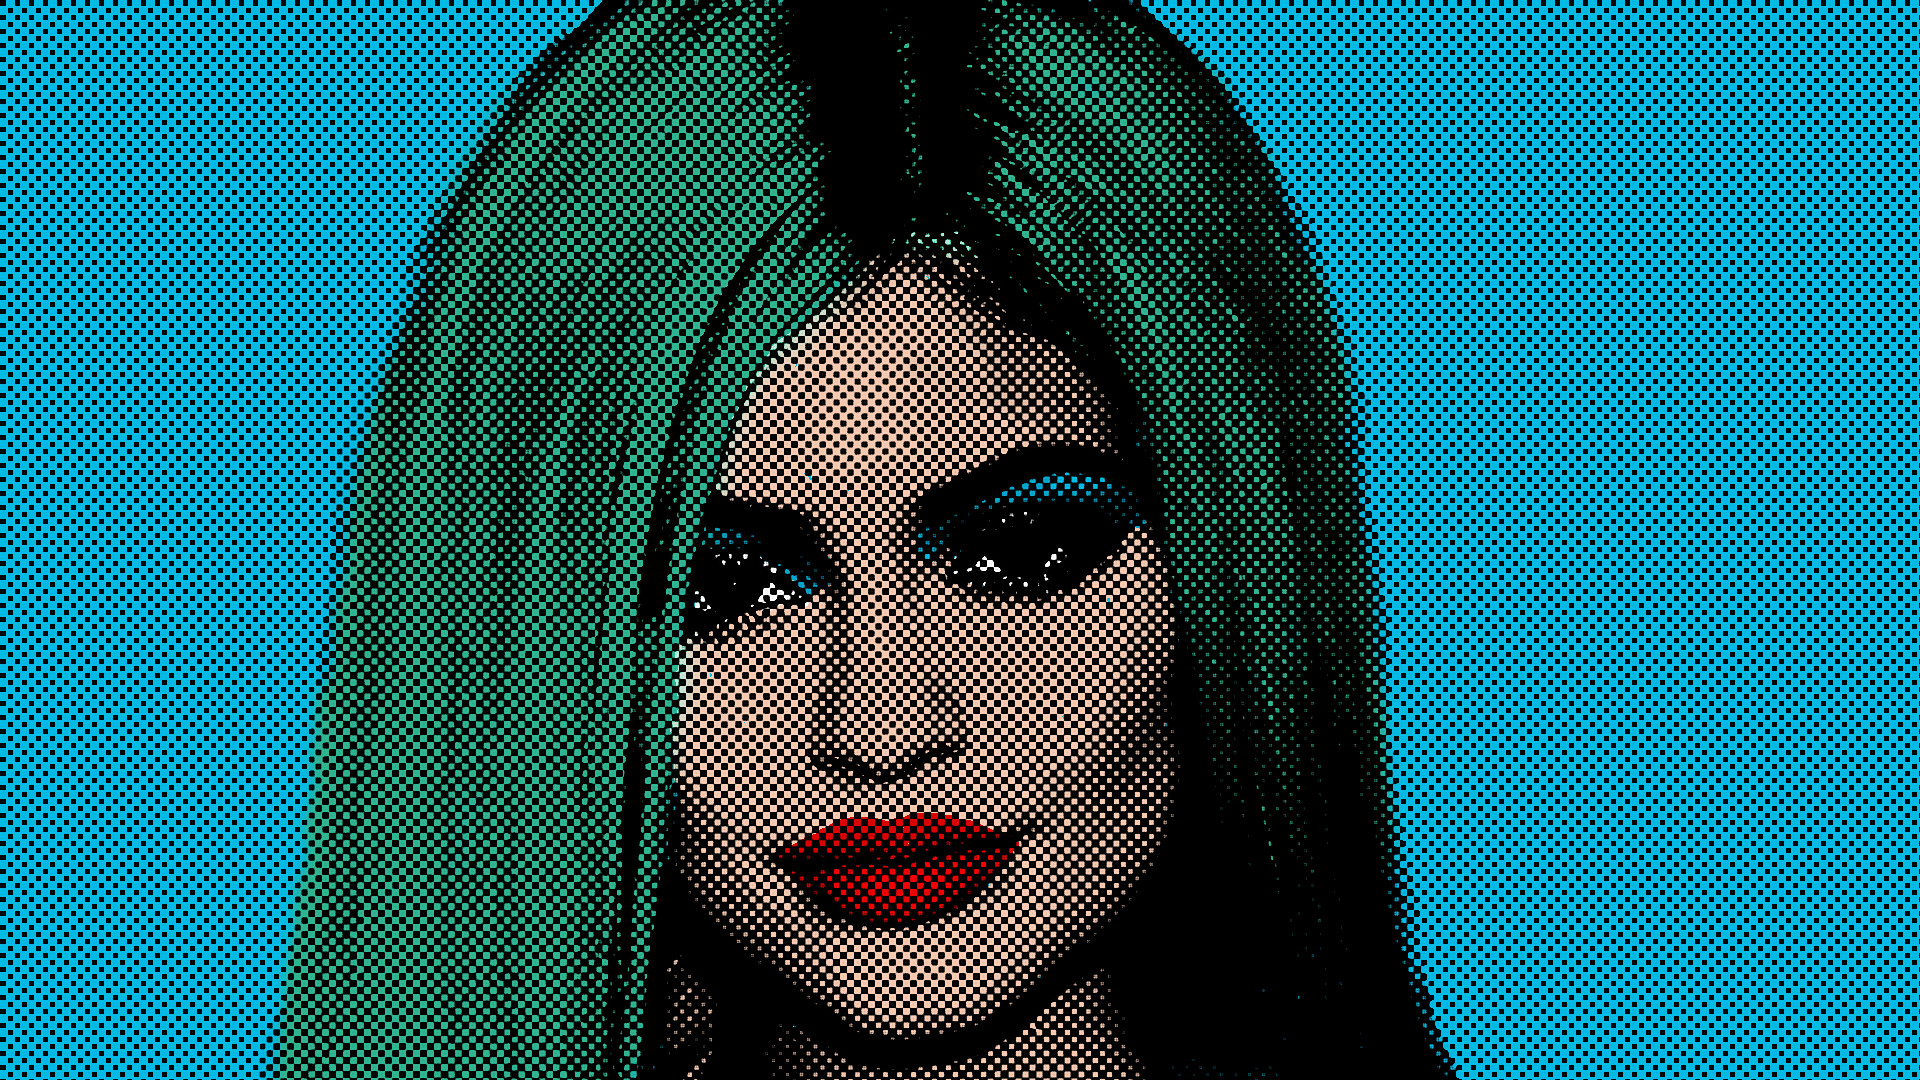 Kylie Jenner Art by technicaluser